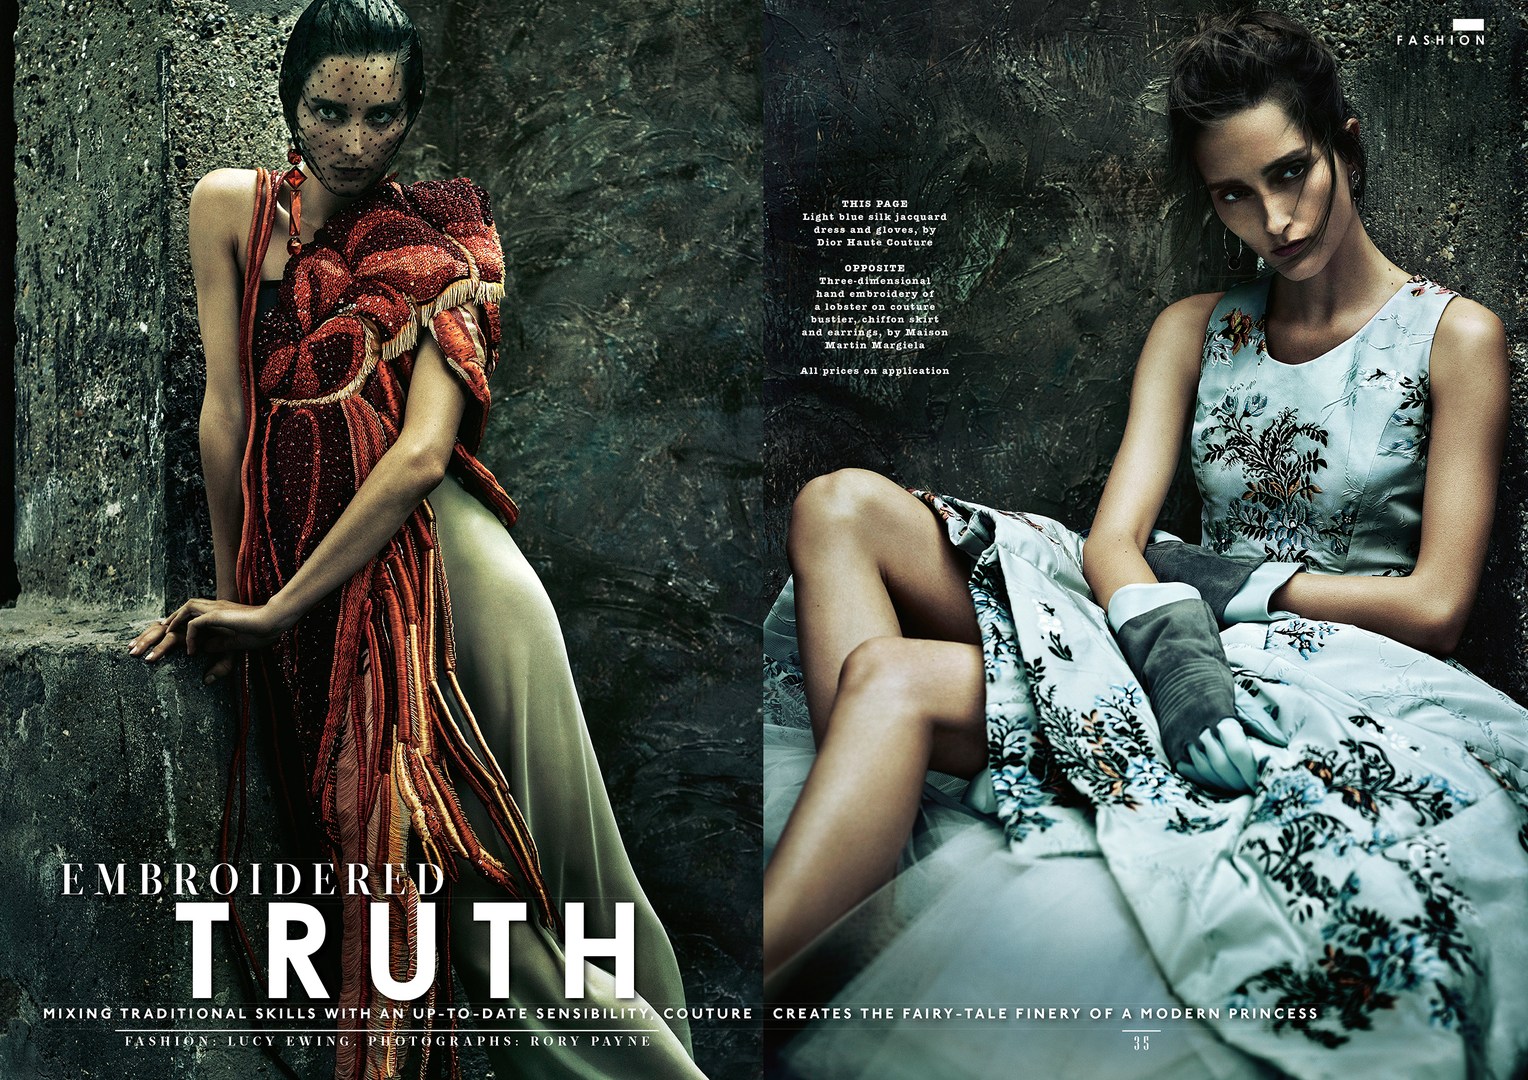 embroidered truth: iekeliene stange by rory payne for sunday times ...